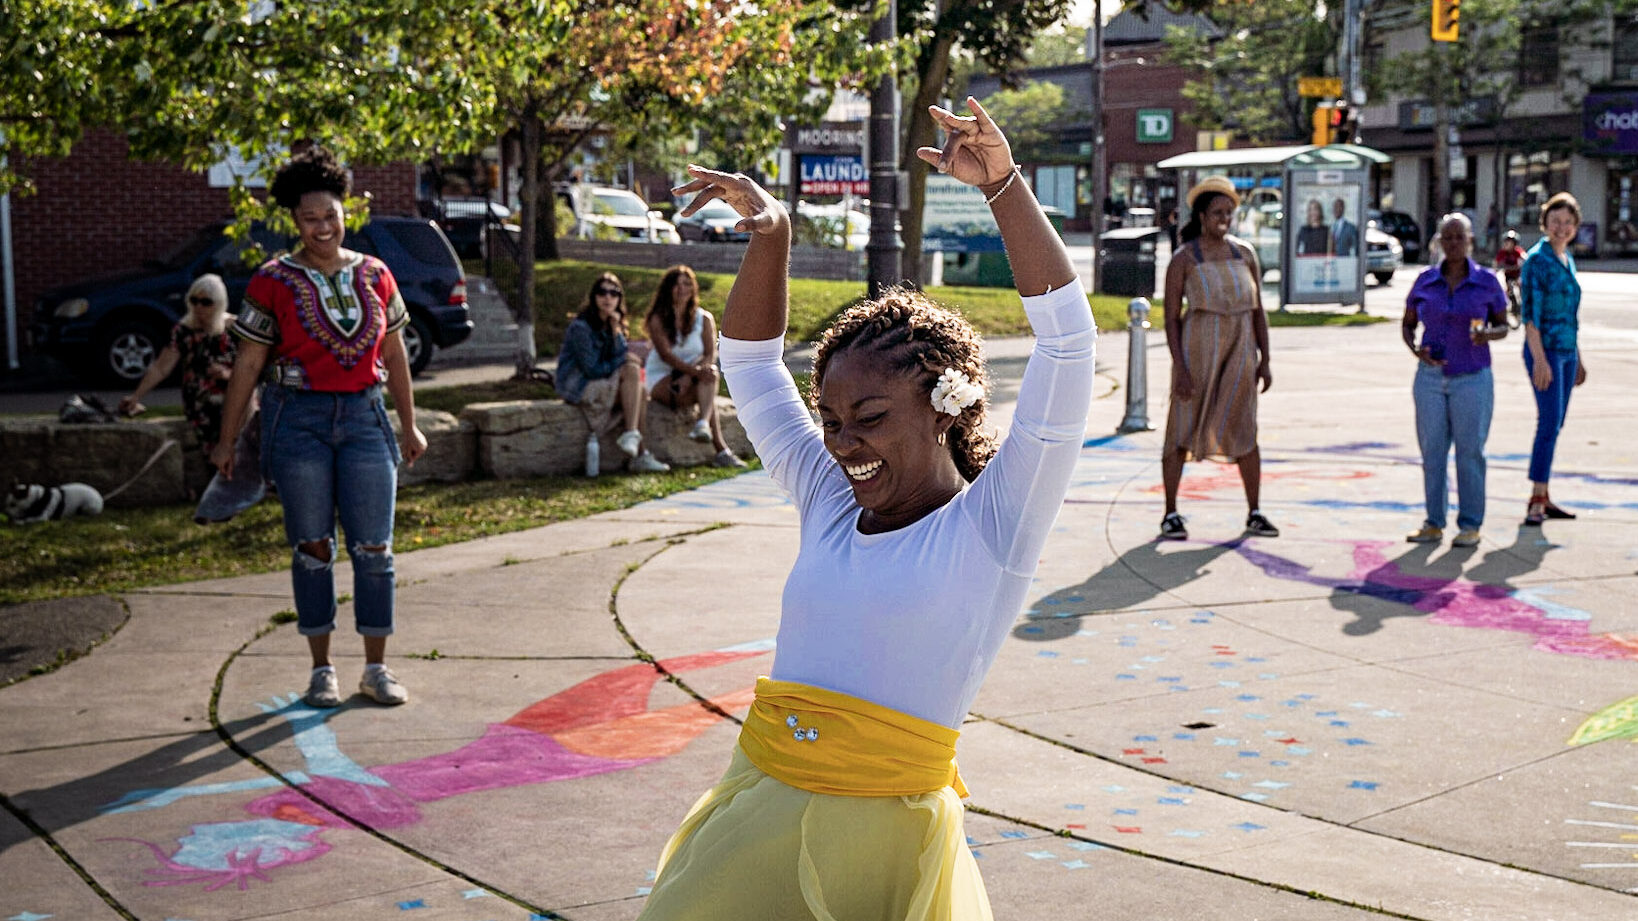 A woman in a white shirt and green skirt leads a dance workshop. Her arms are in the air and she is smiling.